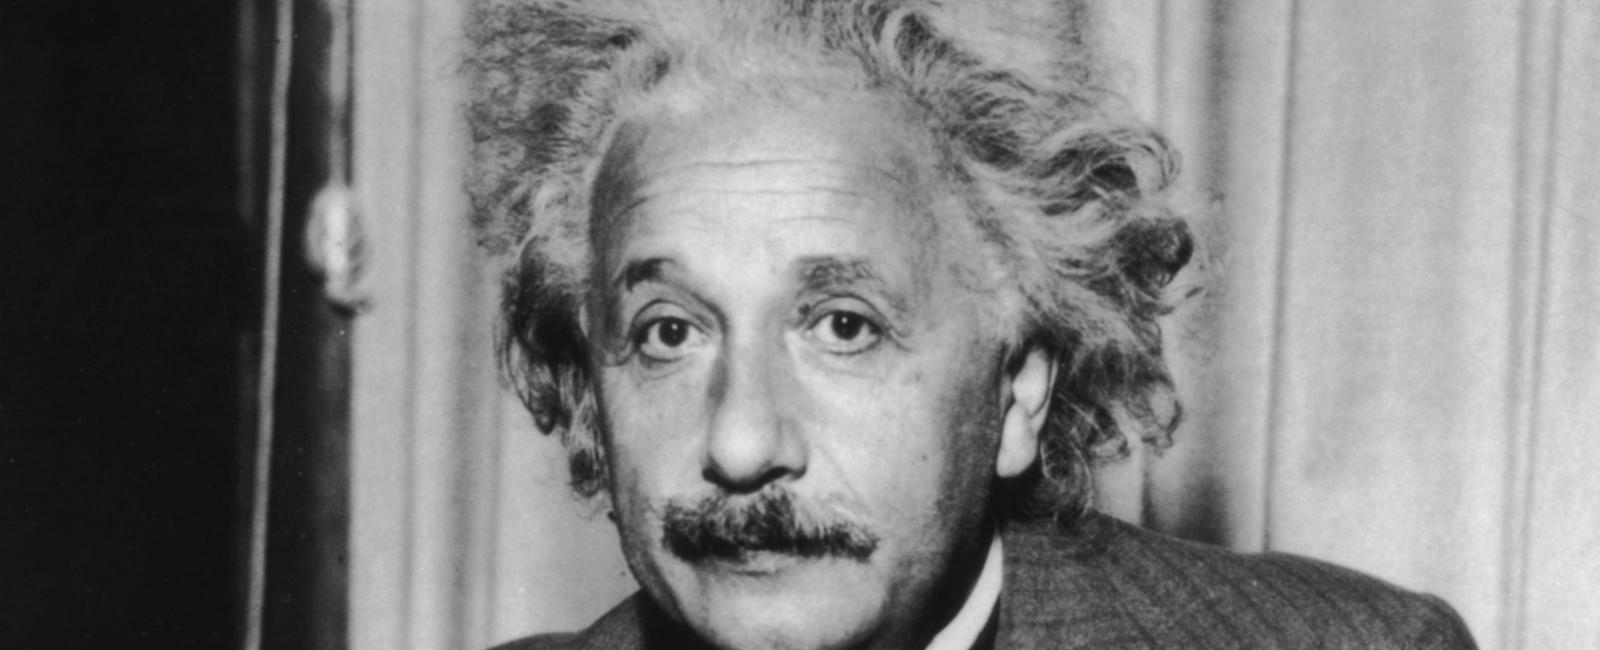 The physicist albert einstein refused the job of president of israel he was asked to be the president when the israeli president died in 1952